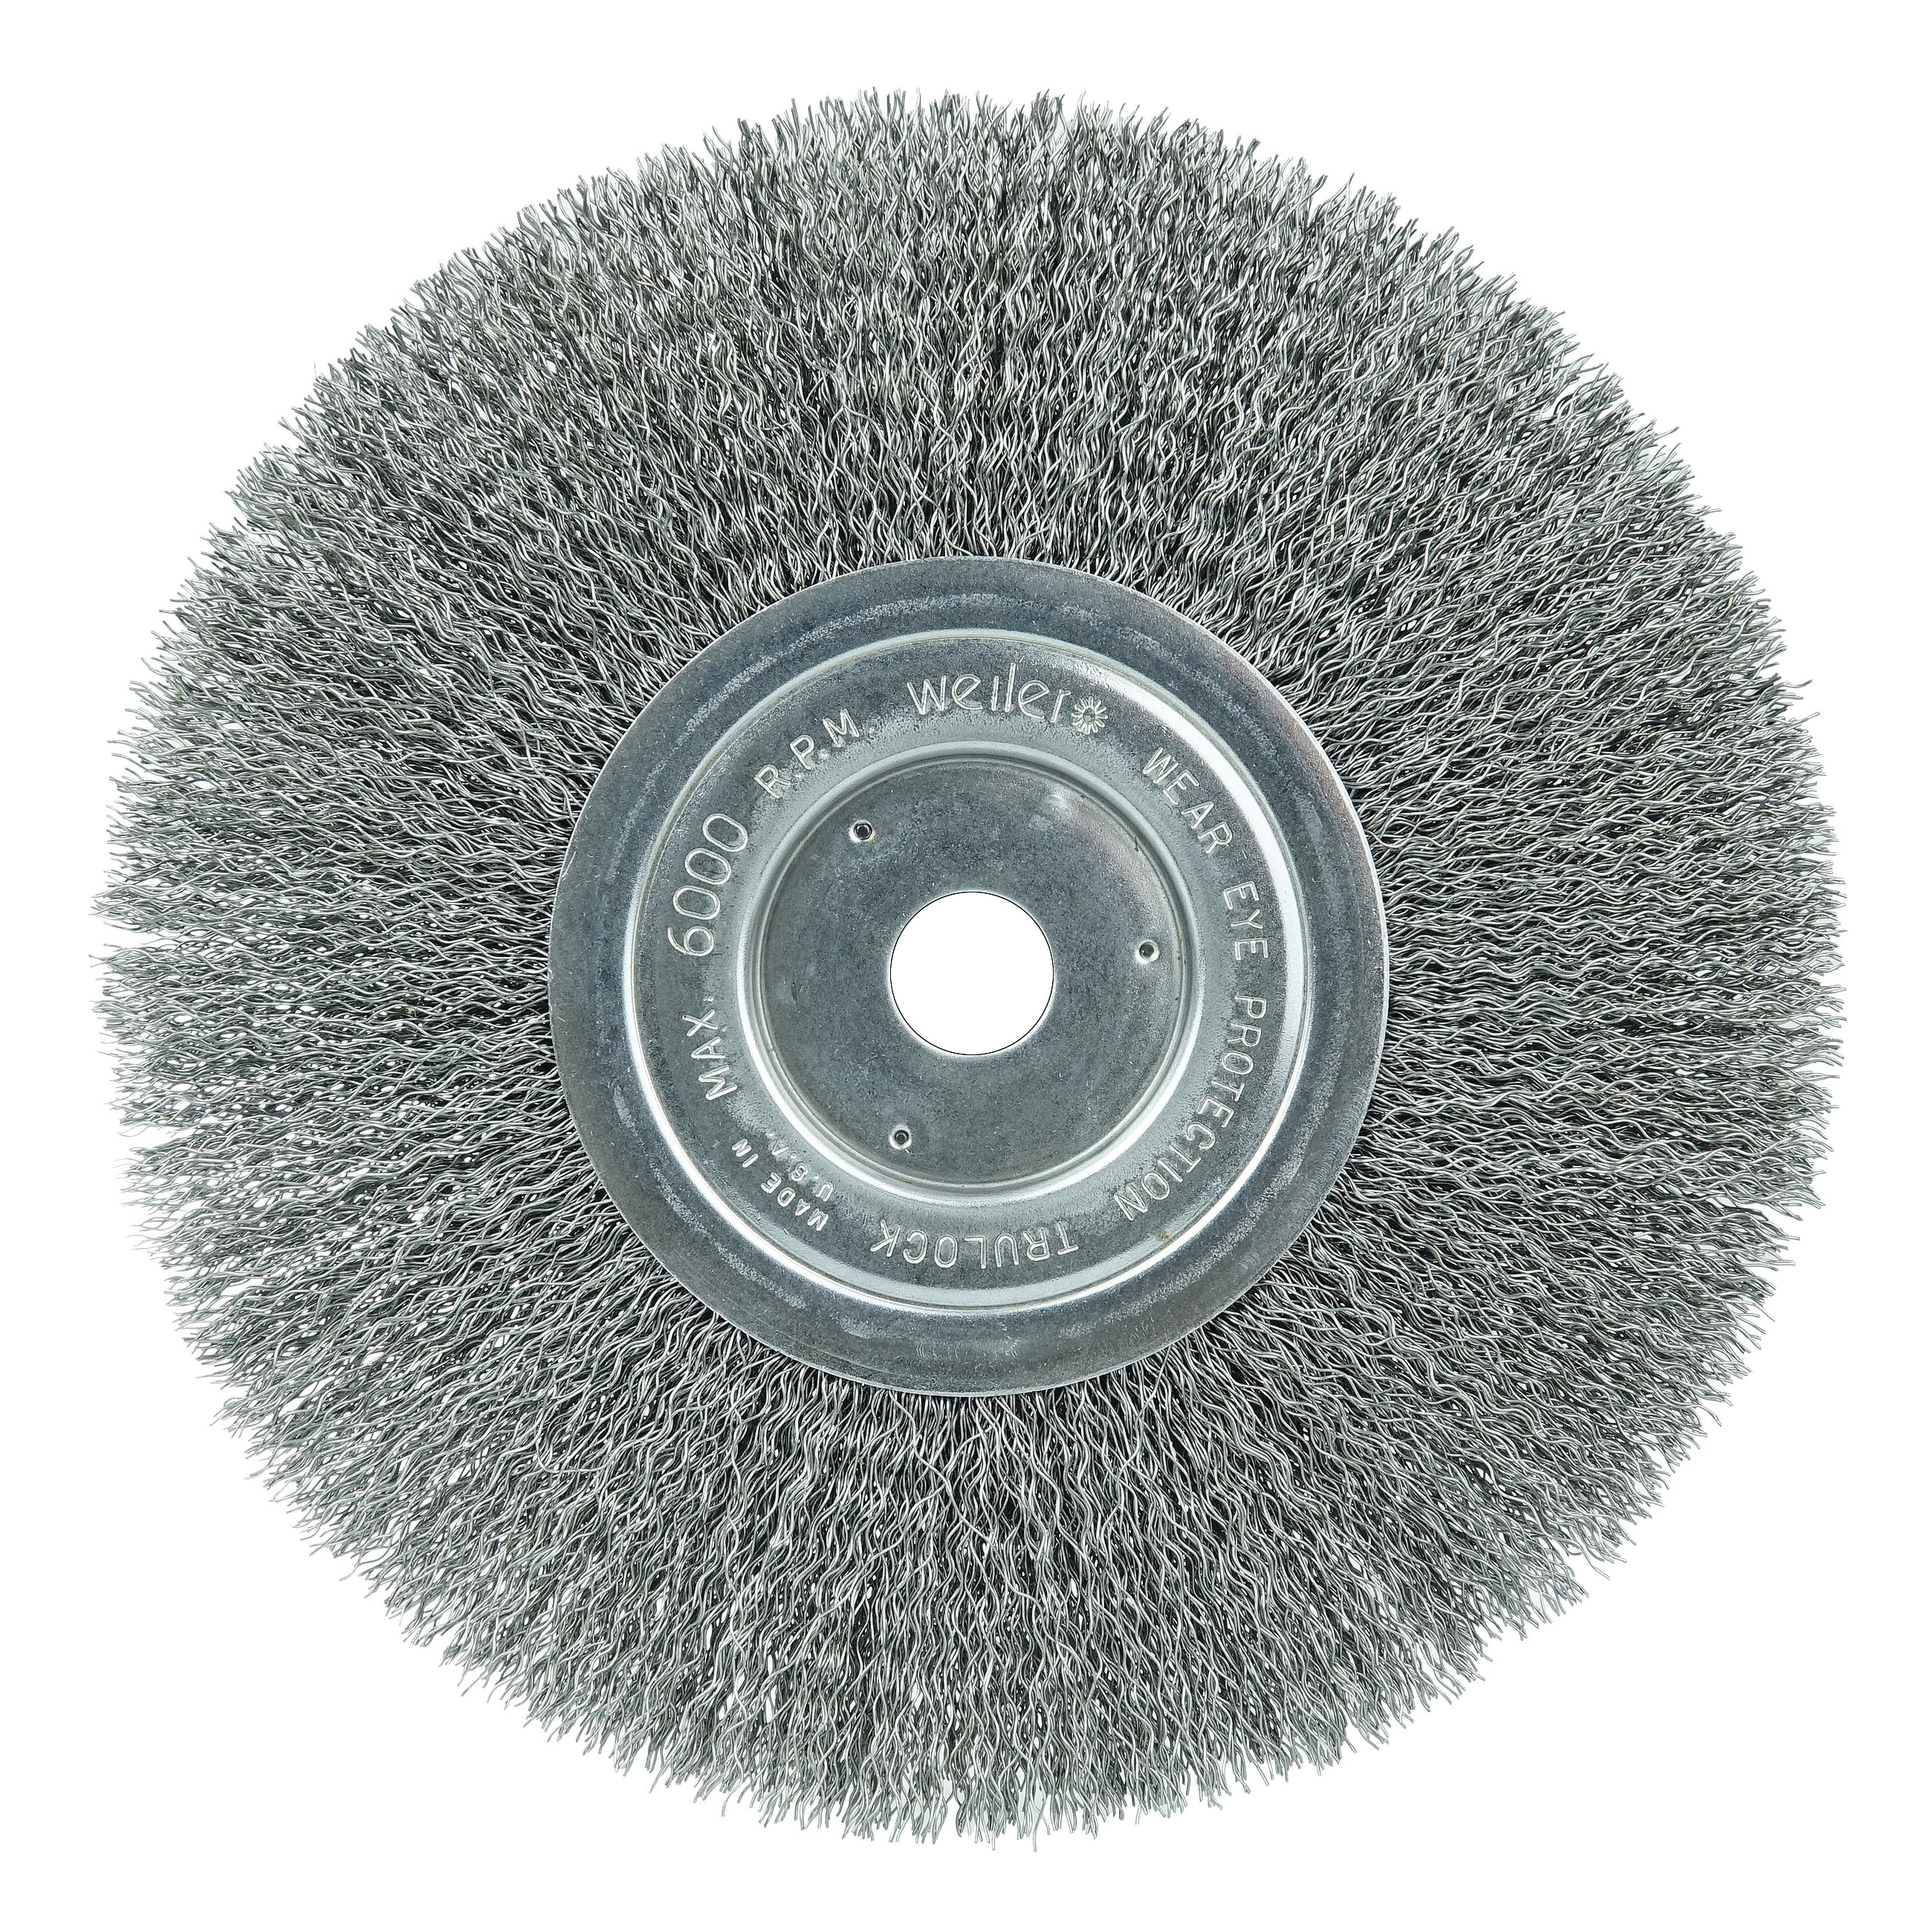 Weiler® 01175 TLN-8 Narrow Face Wheel Brush, 8 in Dia Brush, 3/4 in W Face, 0.014 in Dia Filament/Wire Crimped Filament/Wire, 5/8 in Arbor Hole